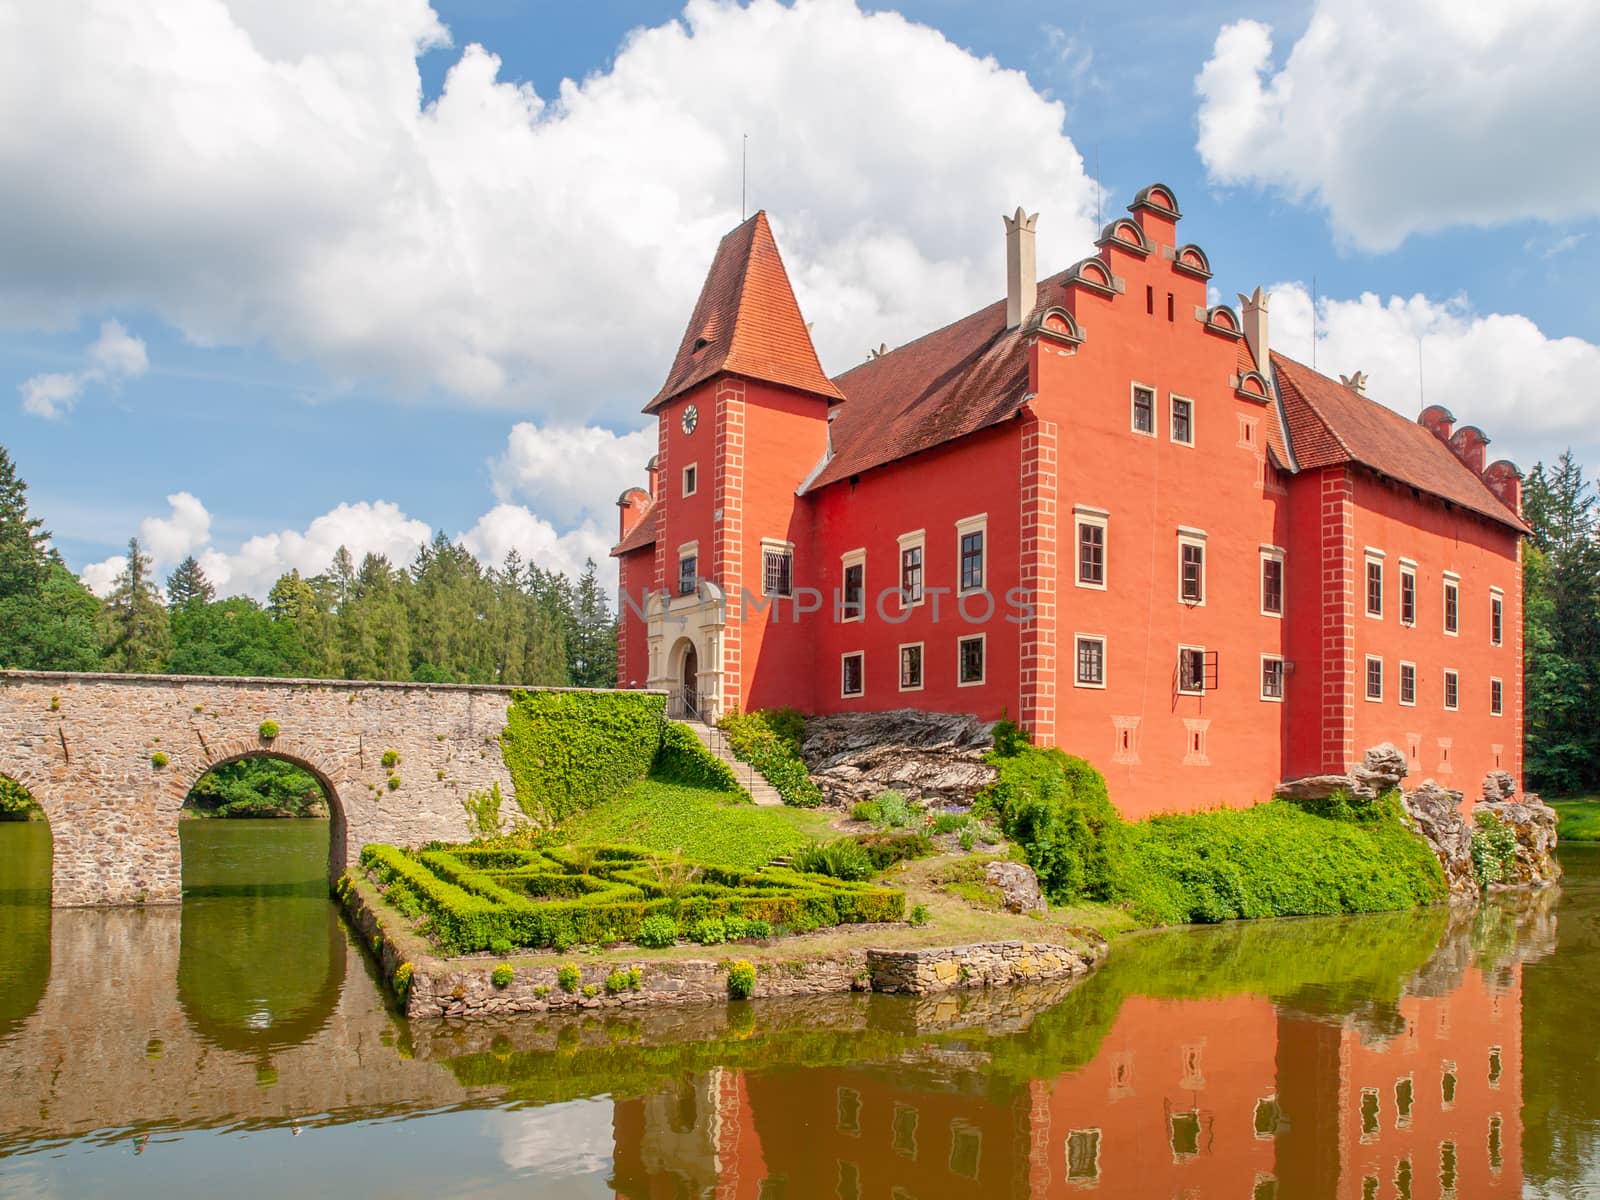 Renaissance chateau Cervena Lhota in Southern Bohemia, Czech Republic. Idyllic and picturesque fairy tale castle on the small island reflected in the romantic lake by pyty